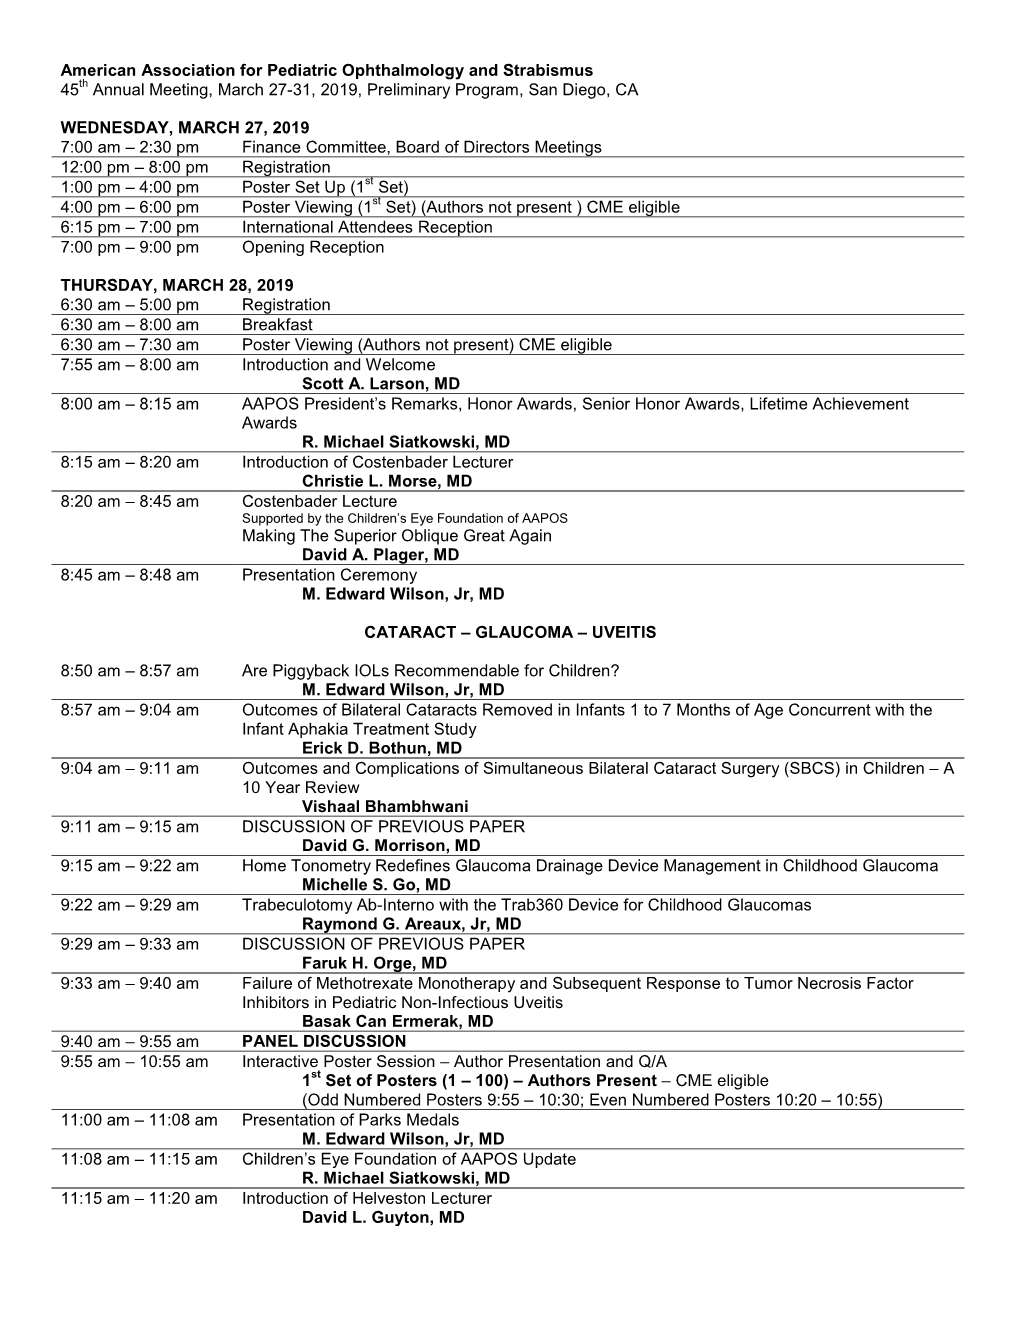 American Association for Pediatric Ophthalmology and Strabismus 45Th Annual Meeting, March 27-31, 2019, Preliminary Program, San Diego, CA